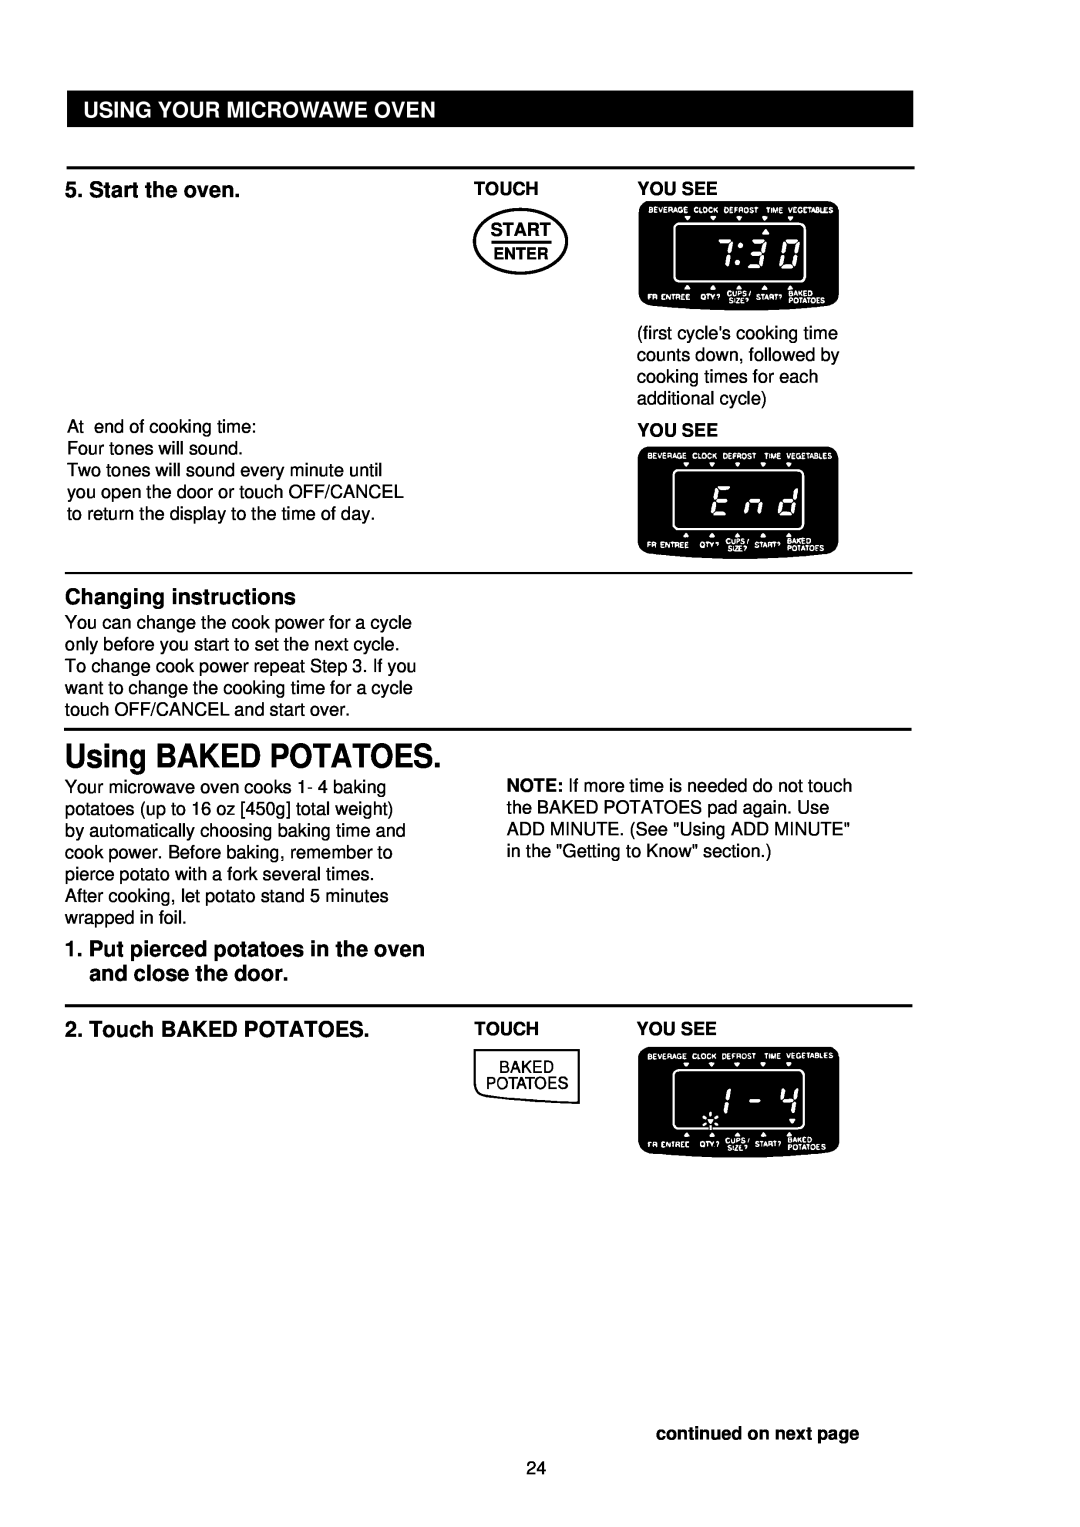 Palsonic PMO-850, PMO-888 Using BAKED POTATOES, Using Your Microwawe Oven, Start the oven, Changing instructions 